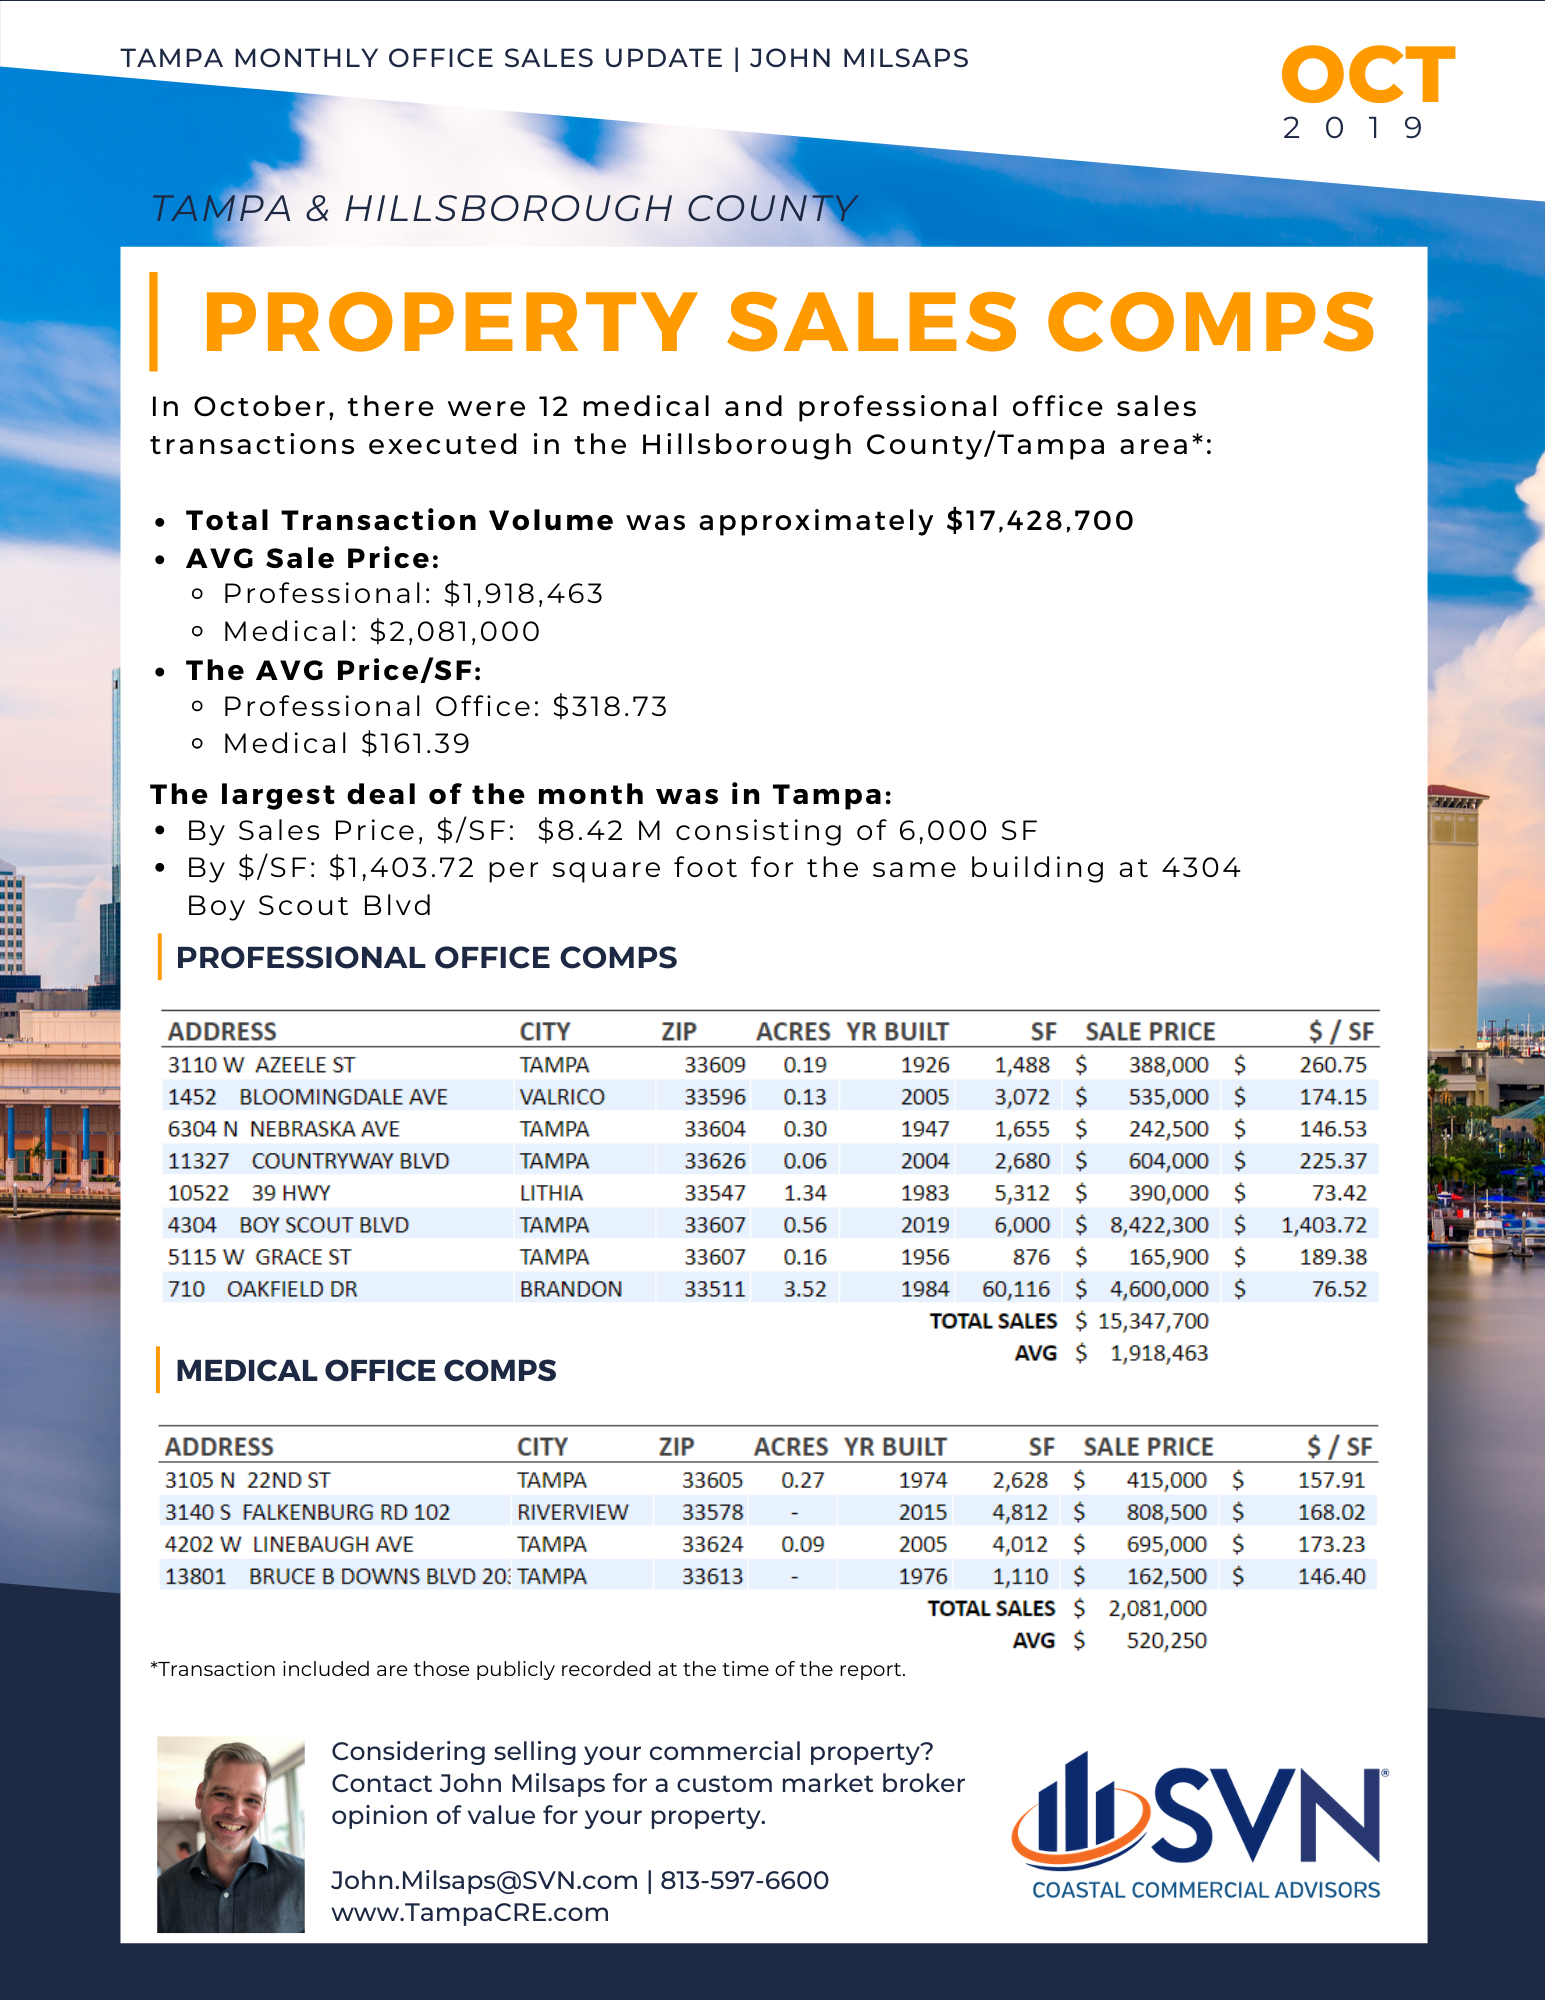 Tampa Monthly Office Sales One-Sheet John Milsaps